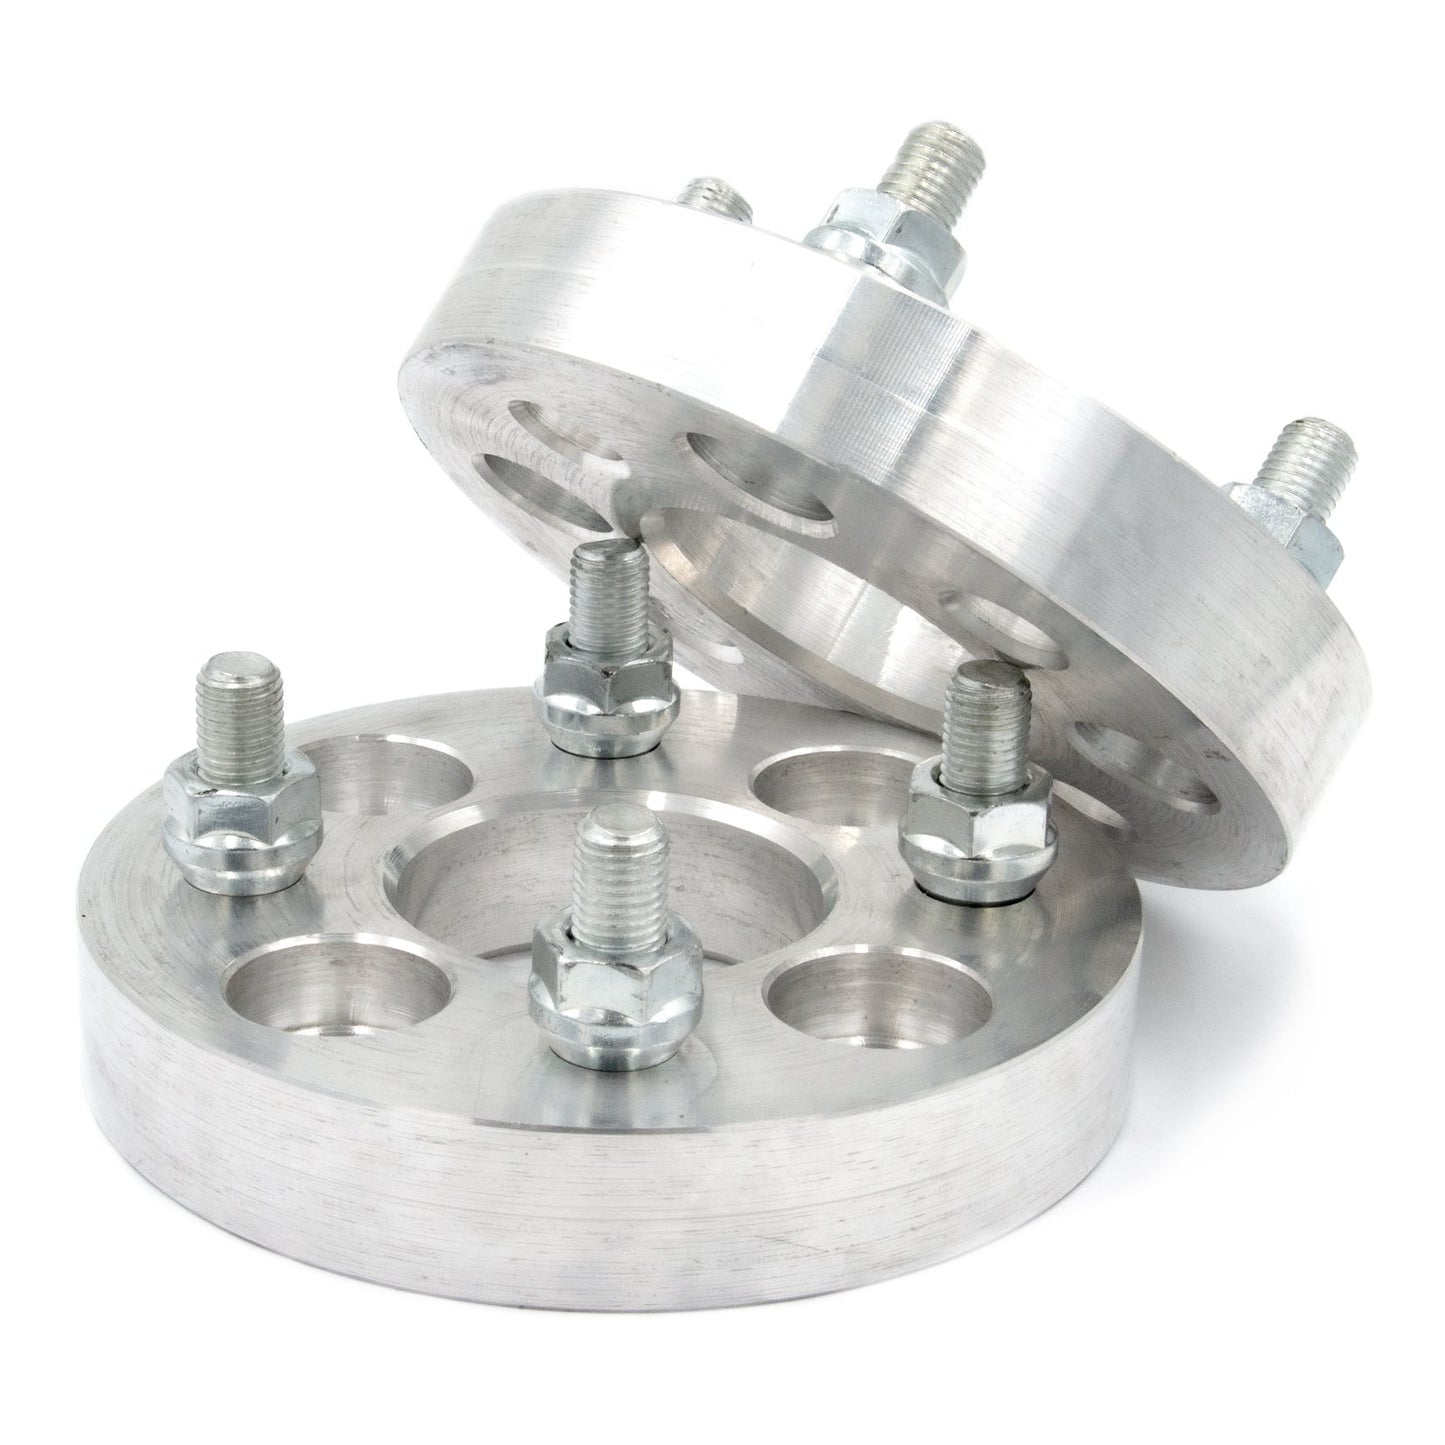 4x110 to 4x137 Wheel Spacer/Adapter - Thickness: 3/4"- 4"